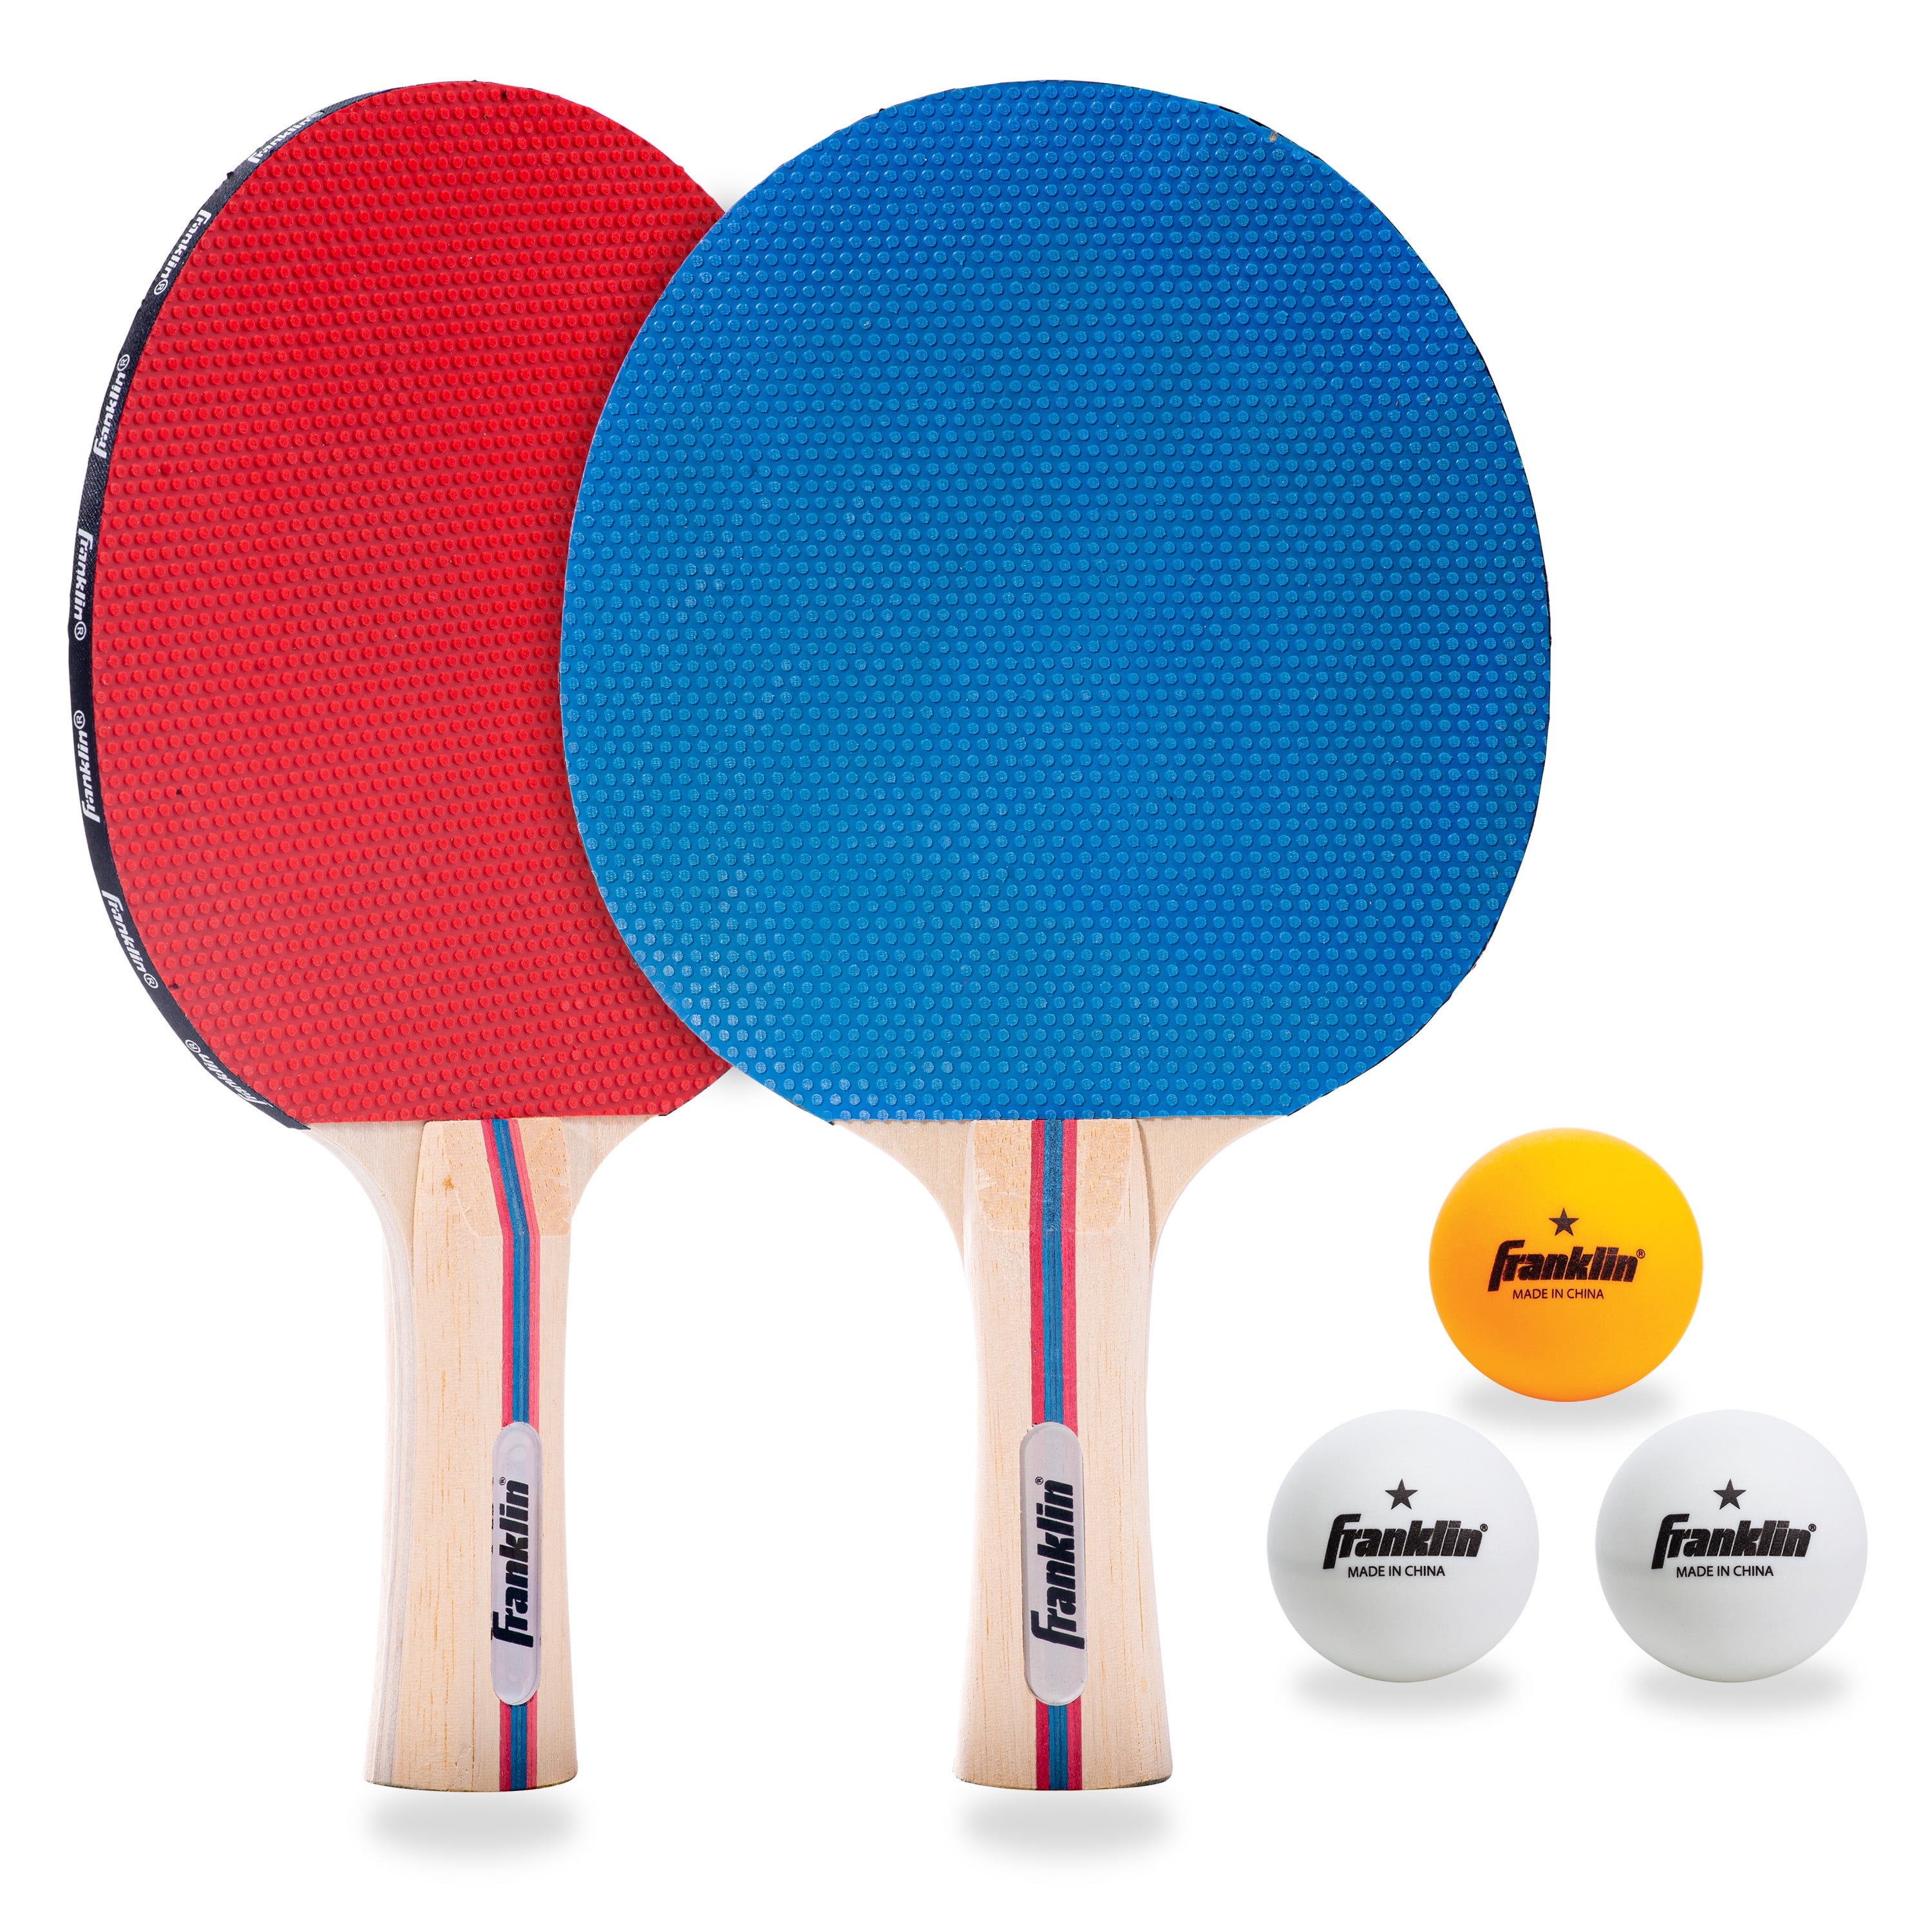 Ping Pong Set with Rackets net & balls great game family fun Table Tennis Kit 